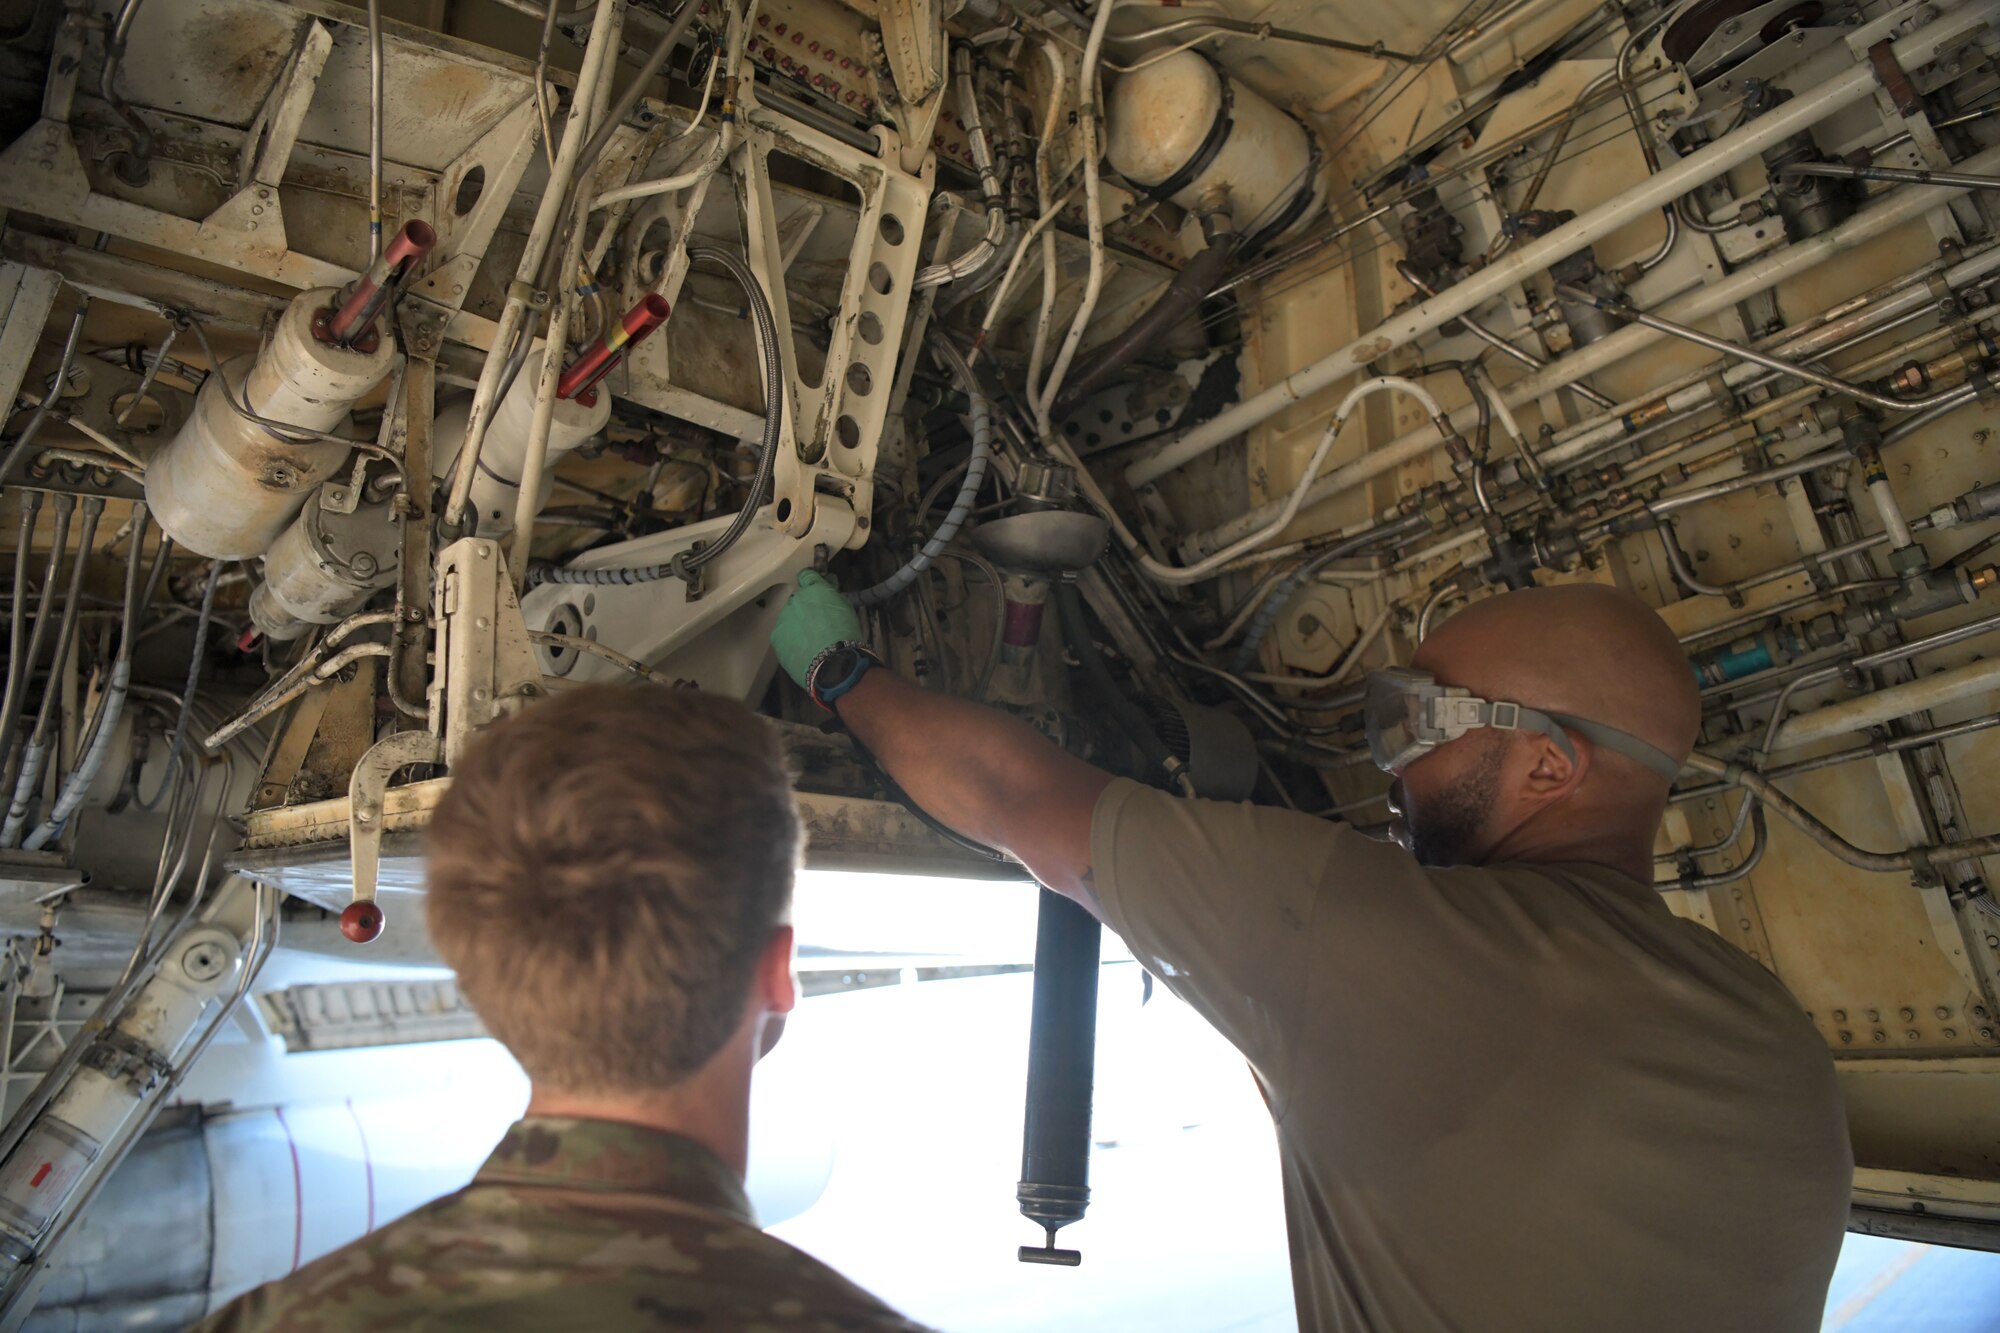 U.S. Air Force Staff Sgt. Dermayne Bullock (right), an E-8C joint surveillance target attack radar system crew chief with the 5th Expeditionary Airborne Command and Control Squadron, demonstrates proper aircraft lubrication for Airman 1st Class Zayne Day (left), a fuels systems technician also with the 5 EACCS, on Kadena Air Base, Japan, Sept. 24, 2020. The Joint STARS is an advanced ground surveillance and battle management system on the E-8C aircraft that is pertinent to supporting a free and open Indo-Pacific. (U.S. Air Force photo by Airman 1st Class Rebeckah Medeiros)